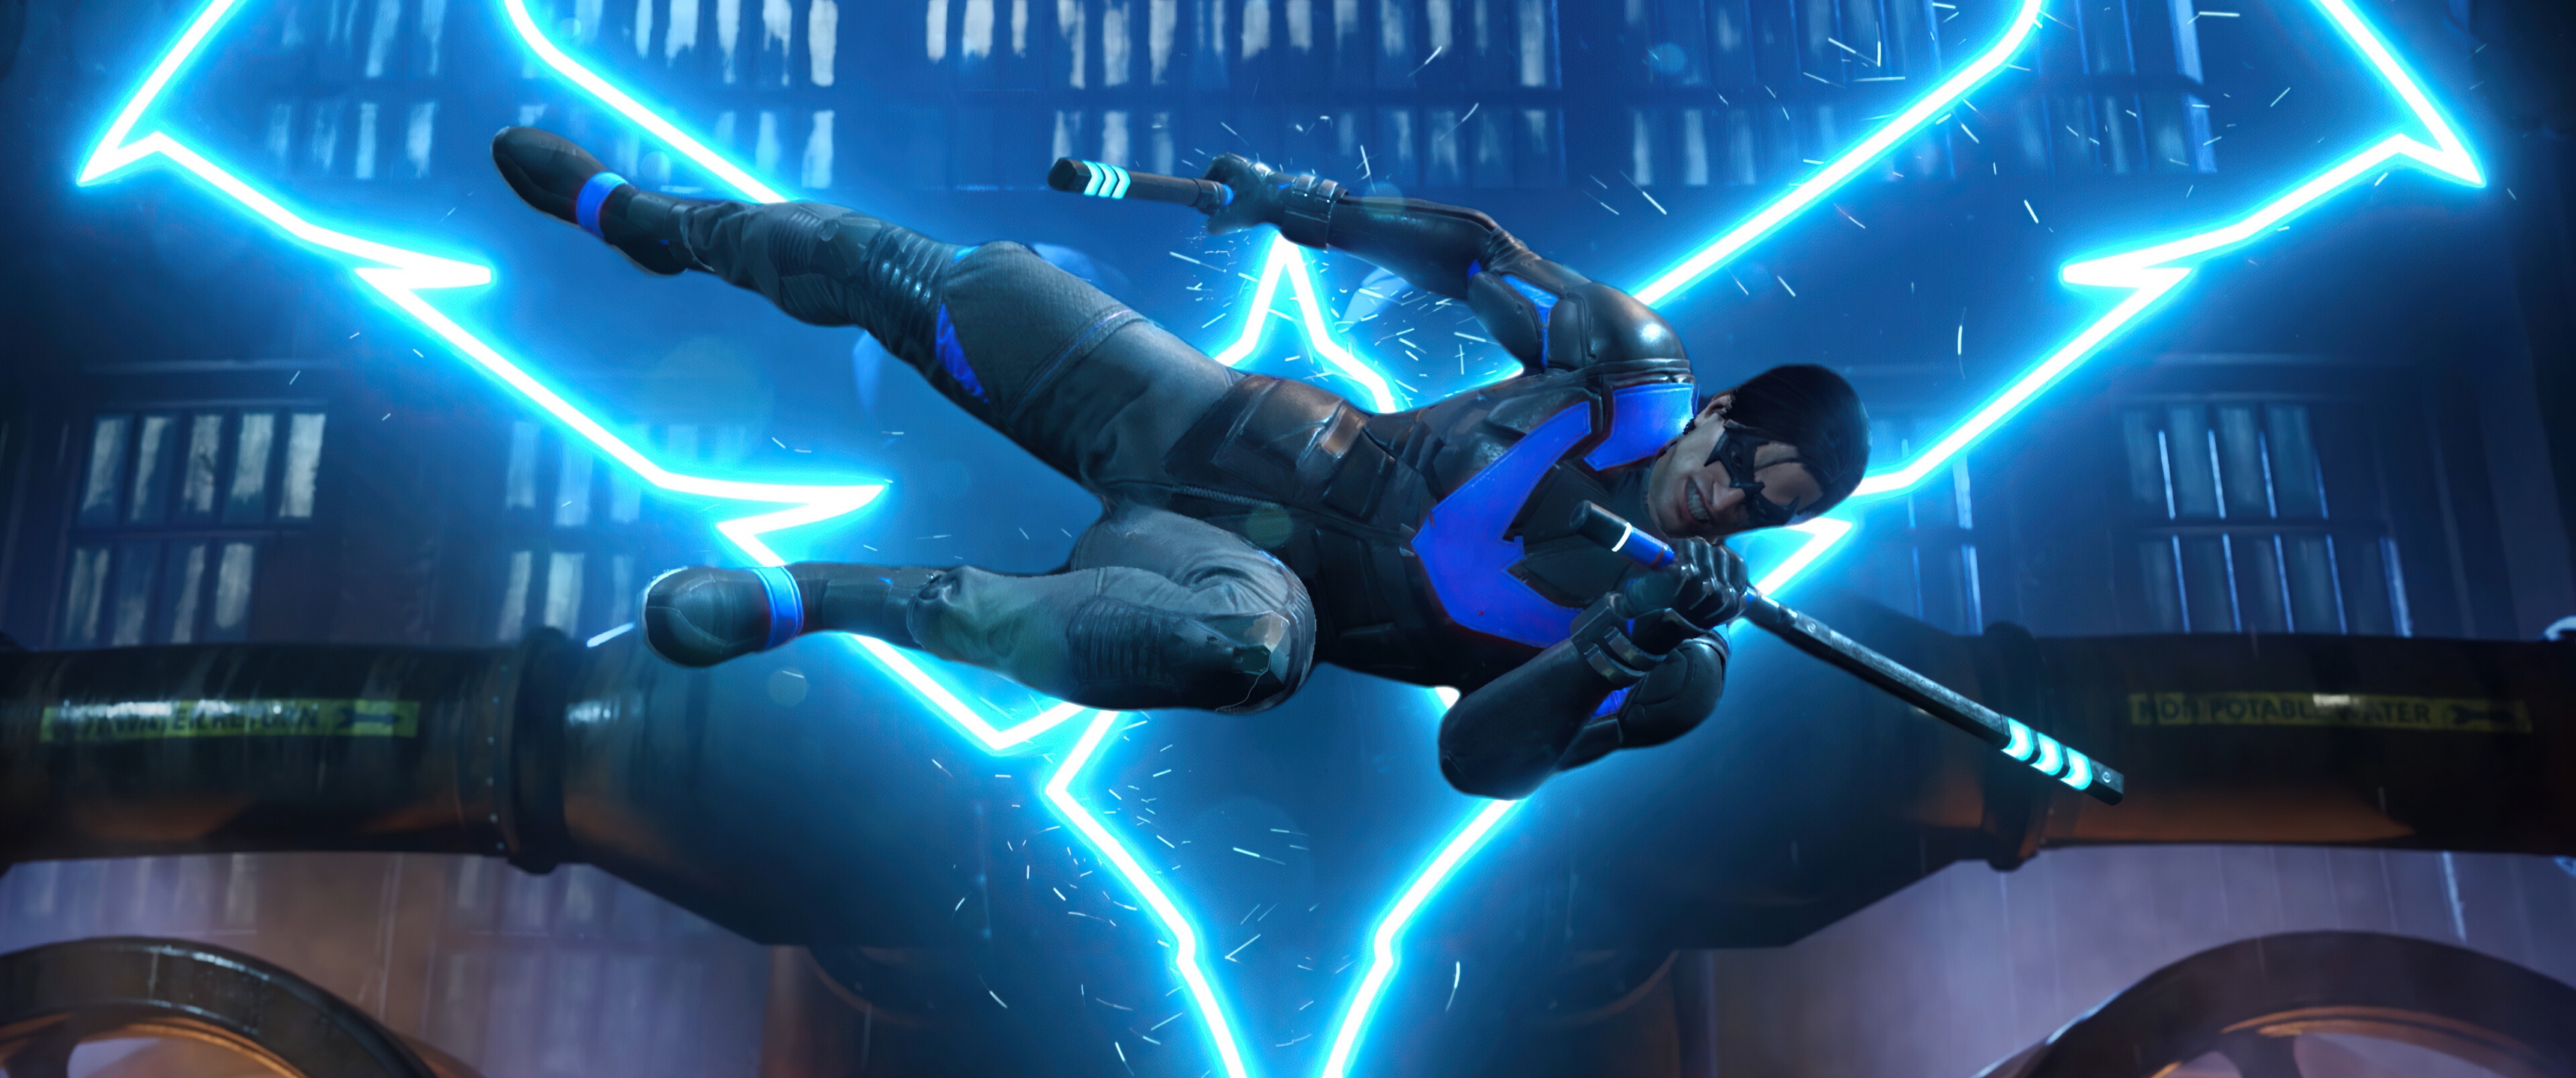 Nightwing In Gotham Knights Game 4K Ultra HD Mobile Wallpaper